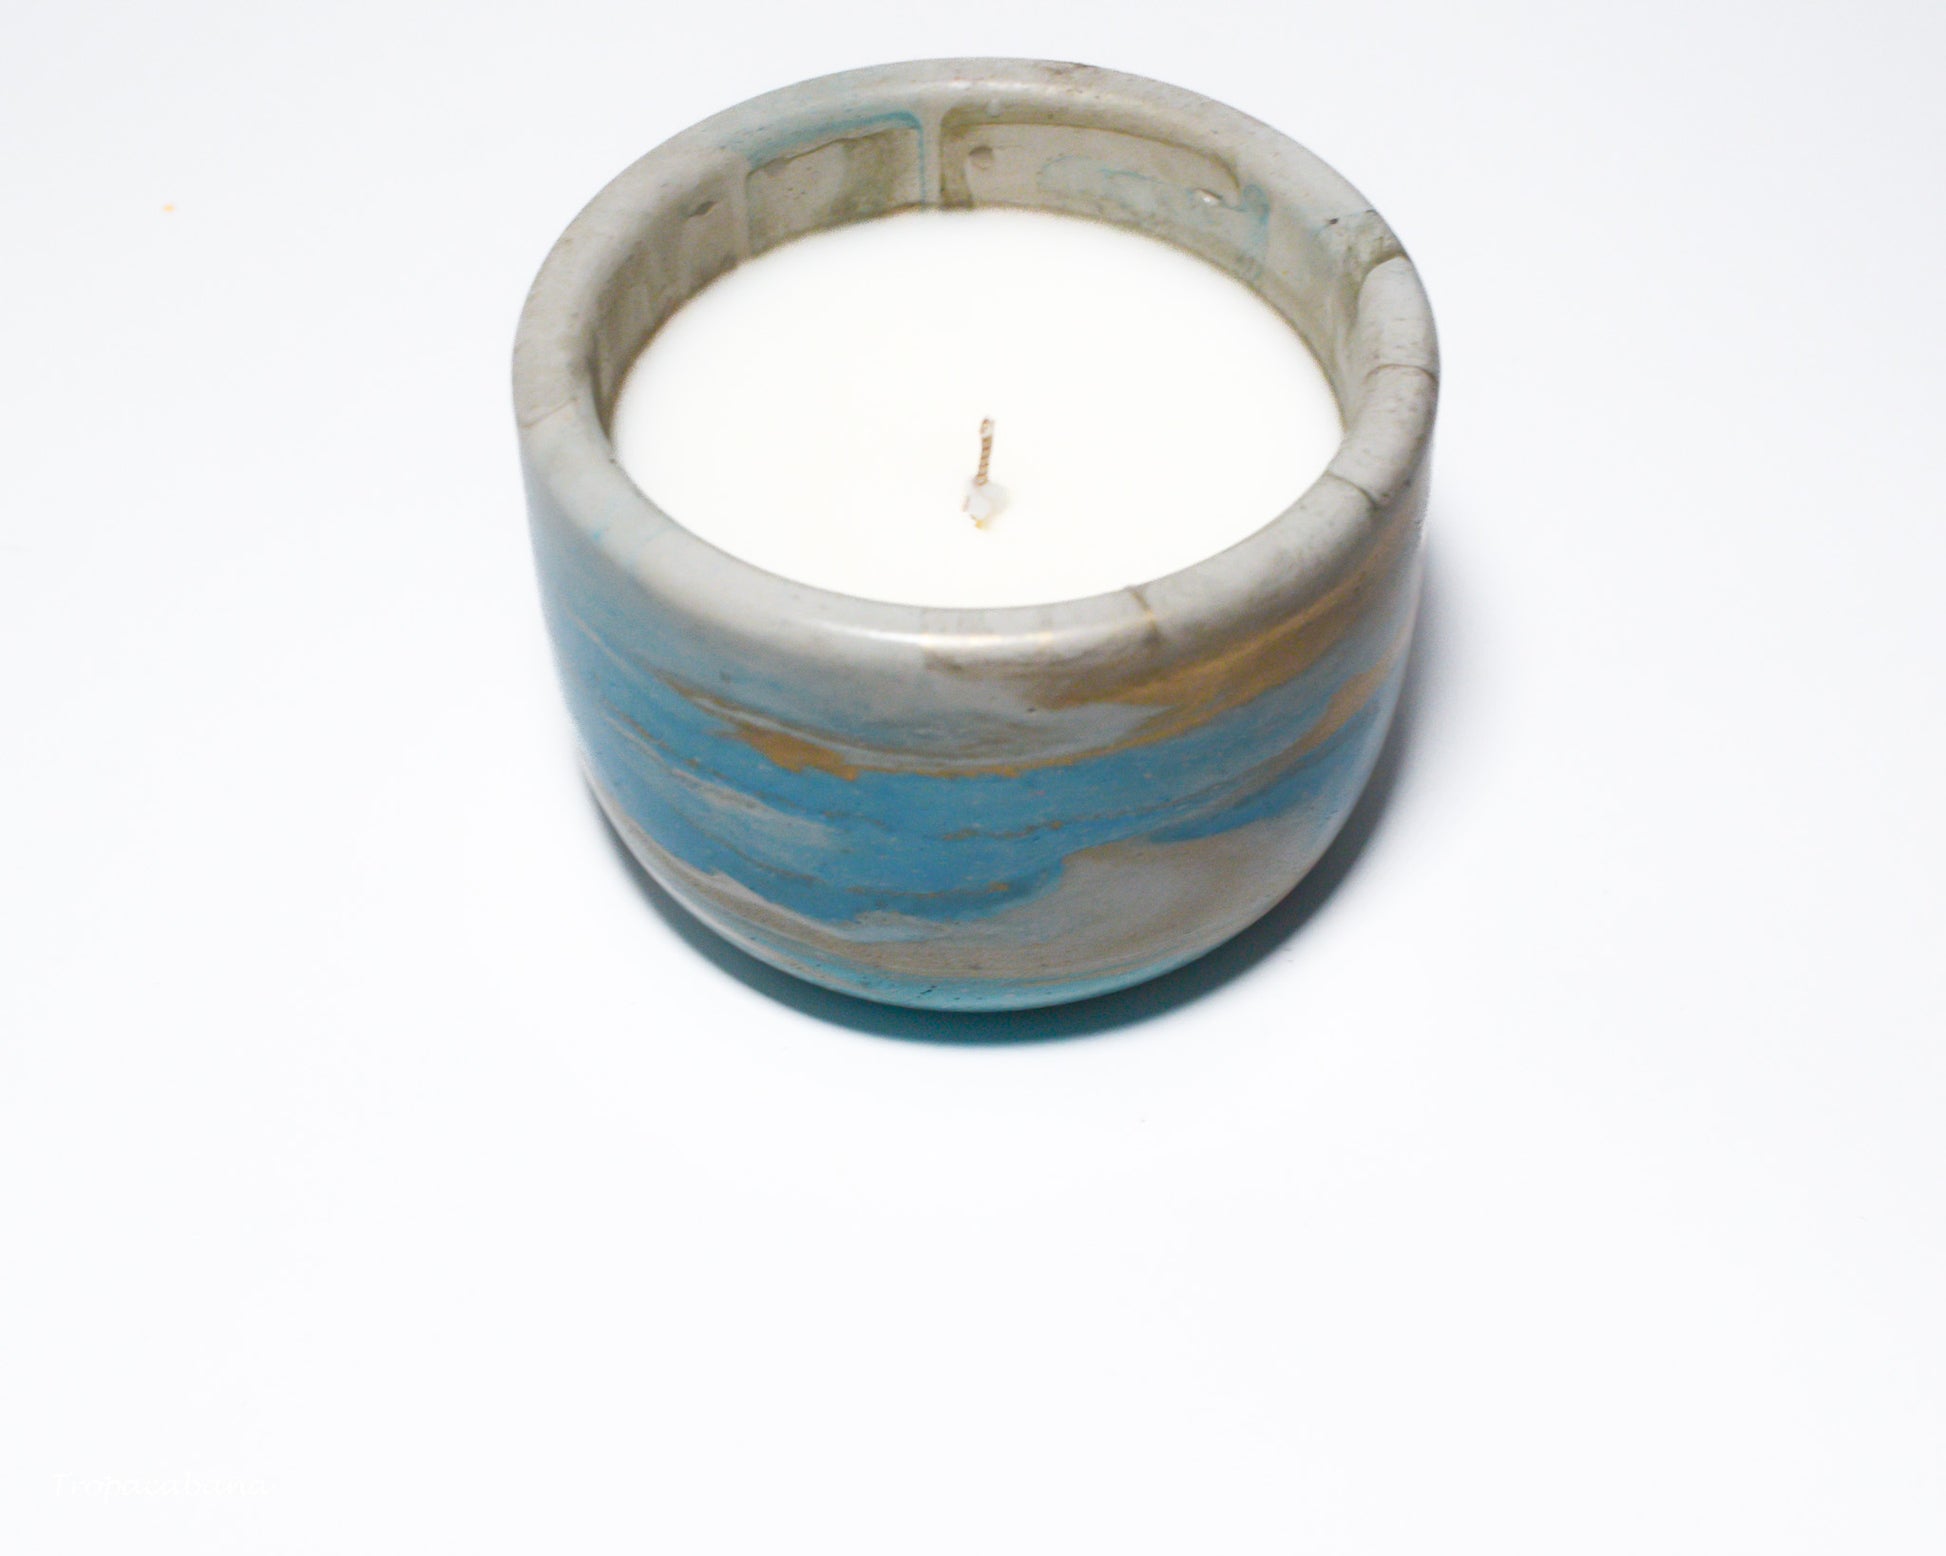 8 oz Handmade Concrete Aqua Dream Candle, in blue, aquamarine, ivory and copper tones, Vegan Candle, Luxury Candle, Coconut Wax Candle, Fragrance of the Ocean and Sand, TropaCabana, Inspired by the tropical beaches of Brazil